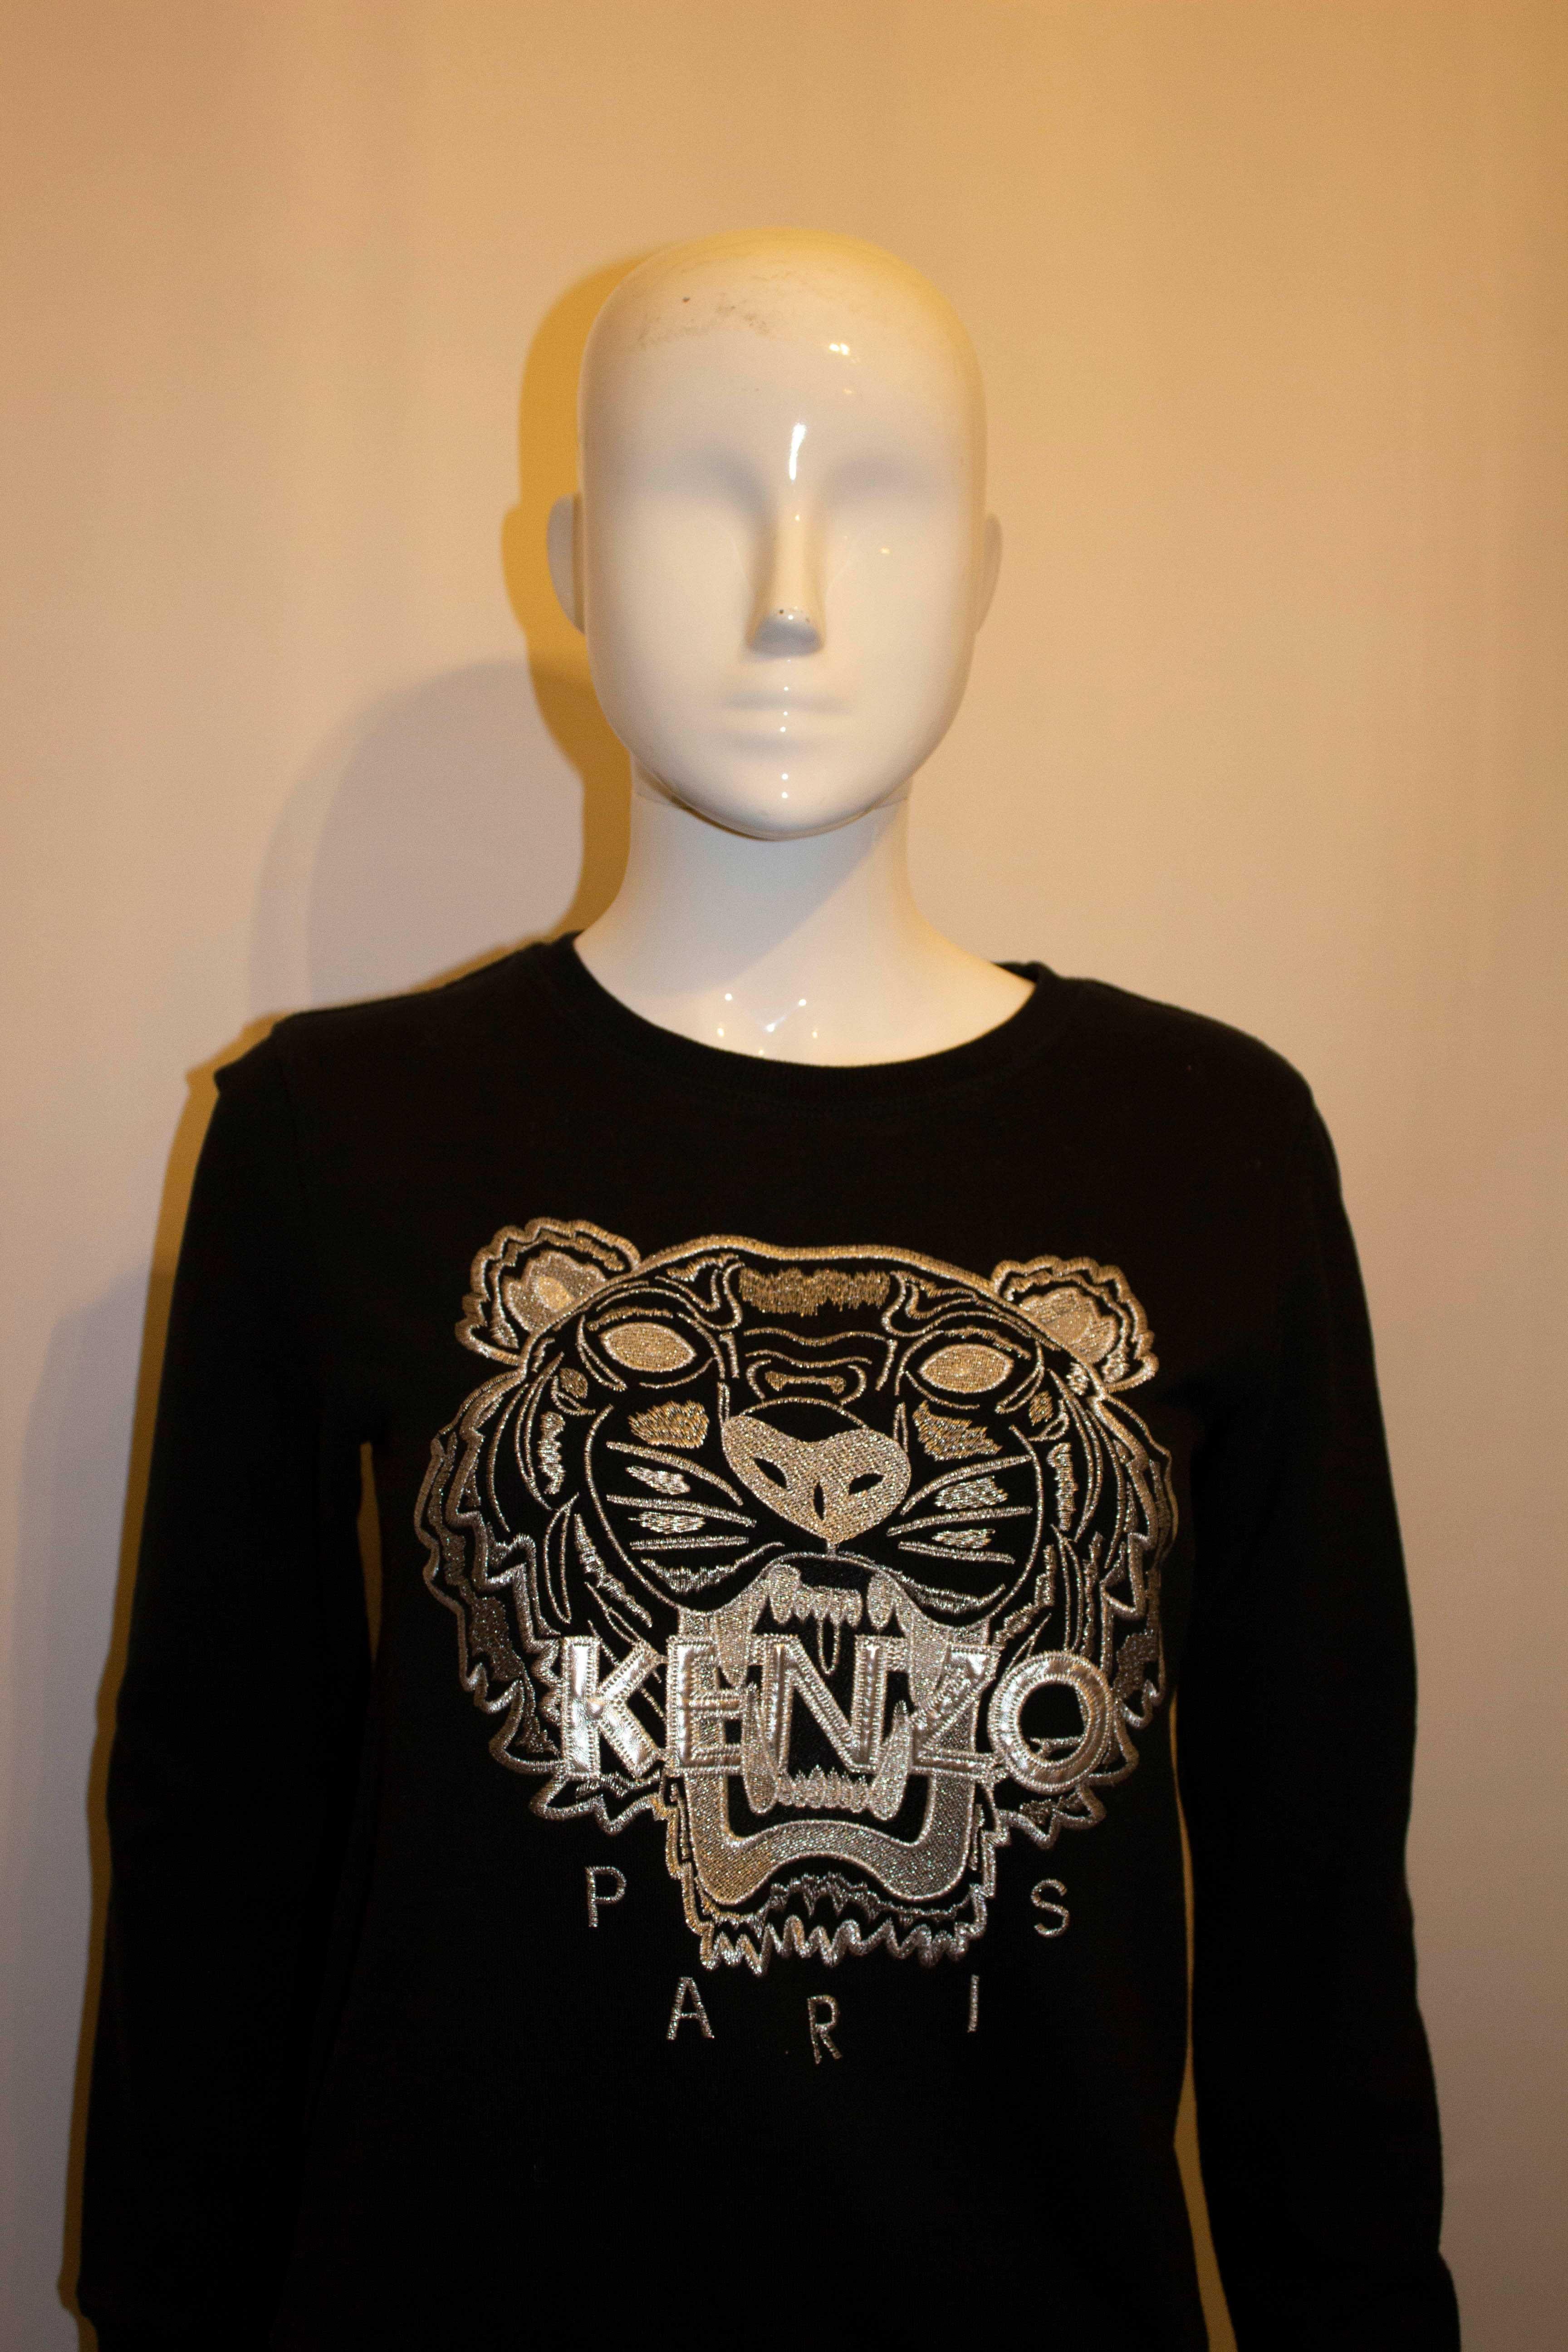 A wonderful unworn sweatshirt by Kenzo Paris. The sweatshirt is black with silver embroidery on the front. 100% cotton . Size M Bust 36'',length 23''